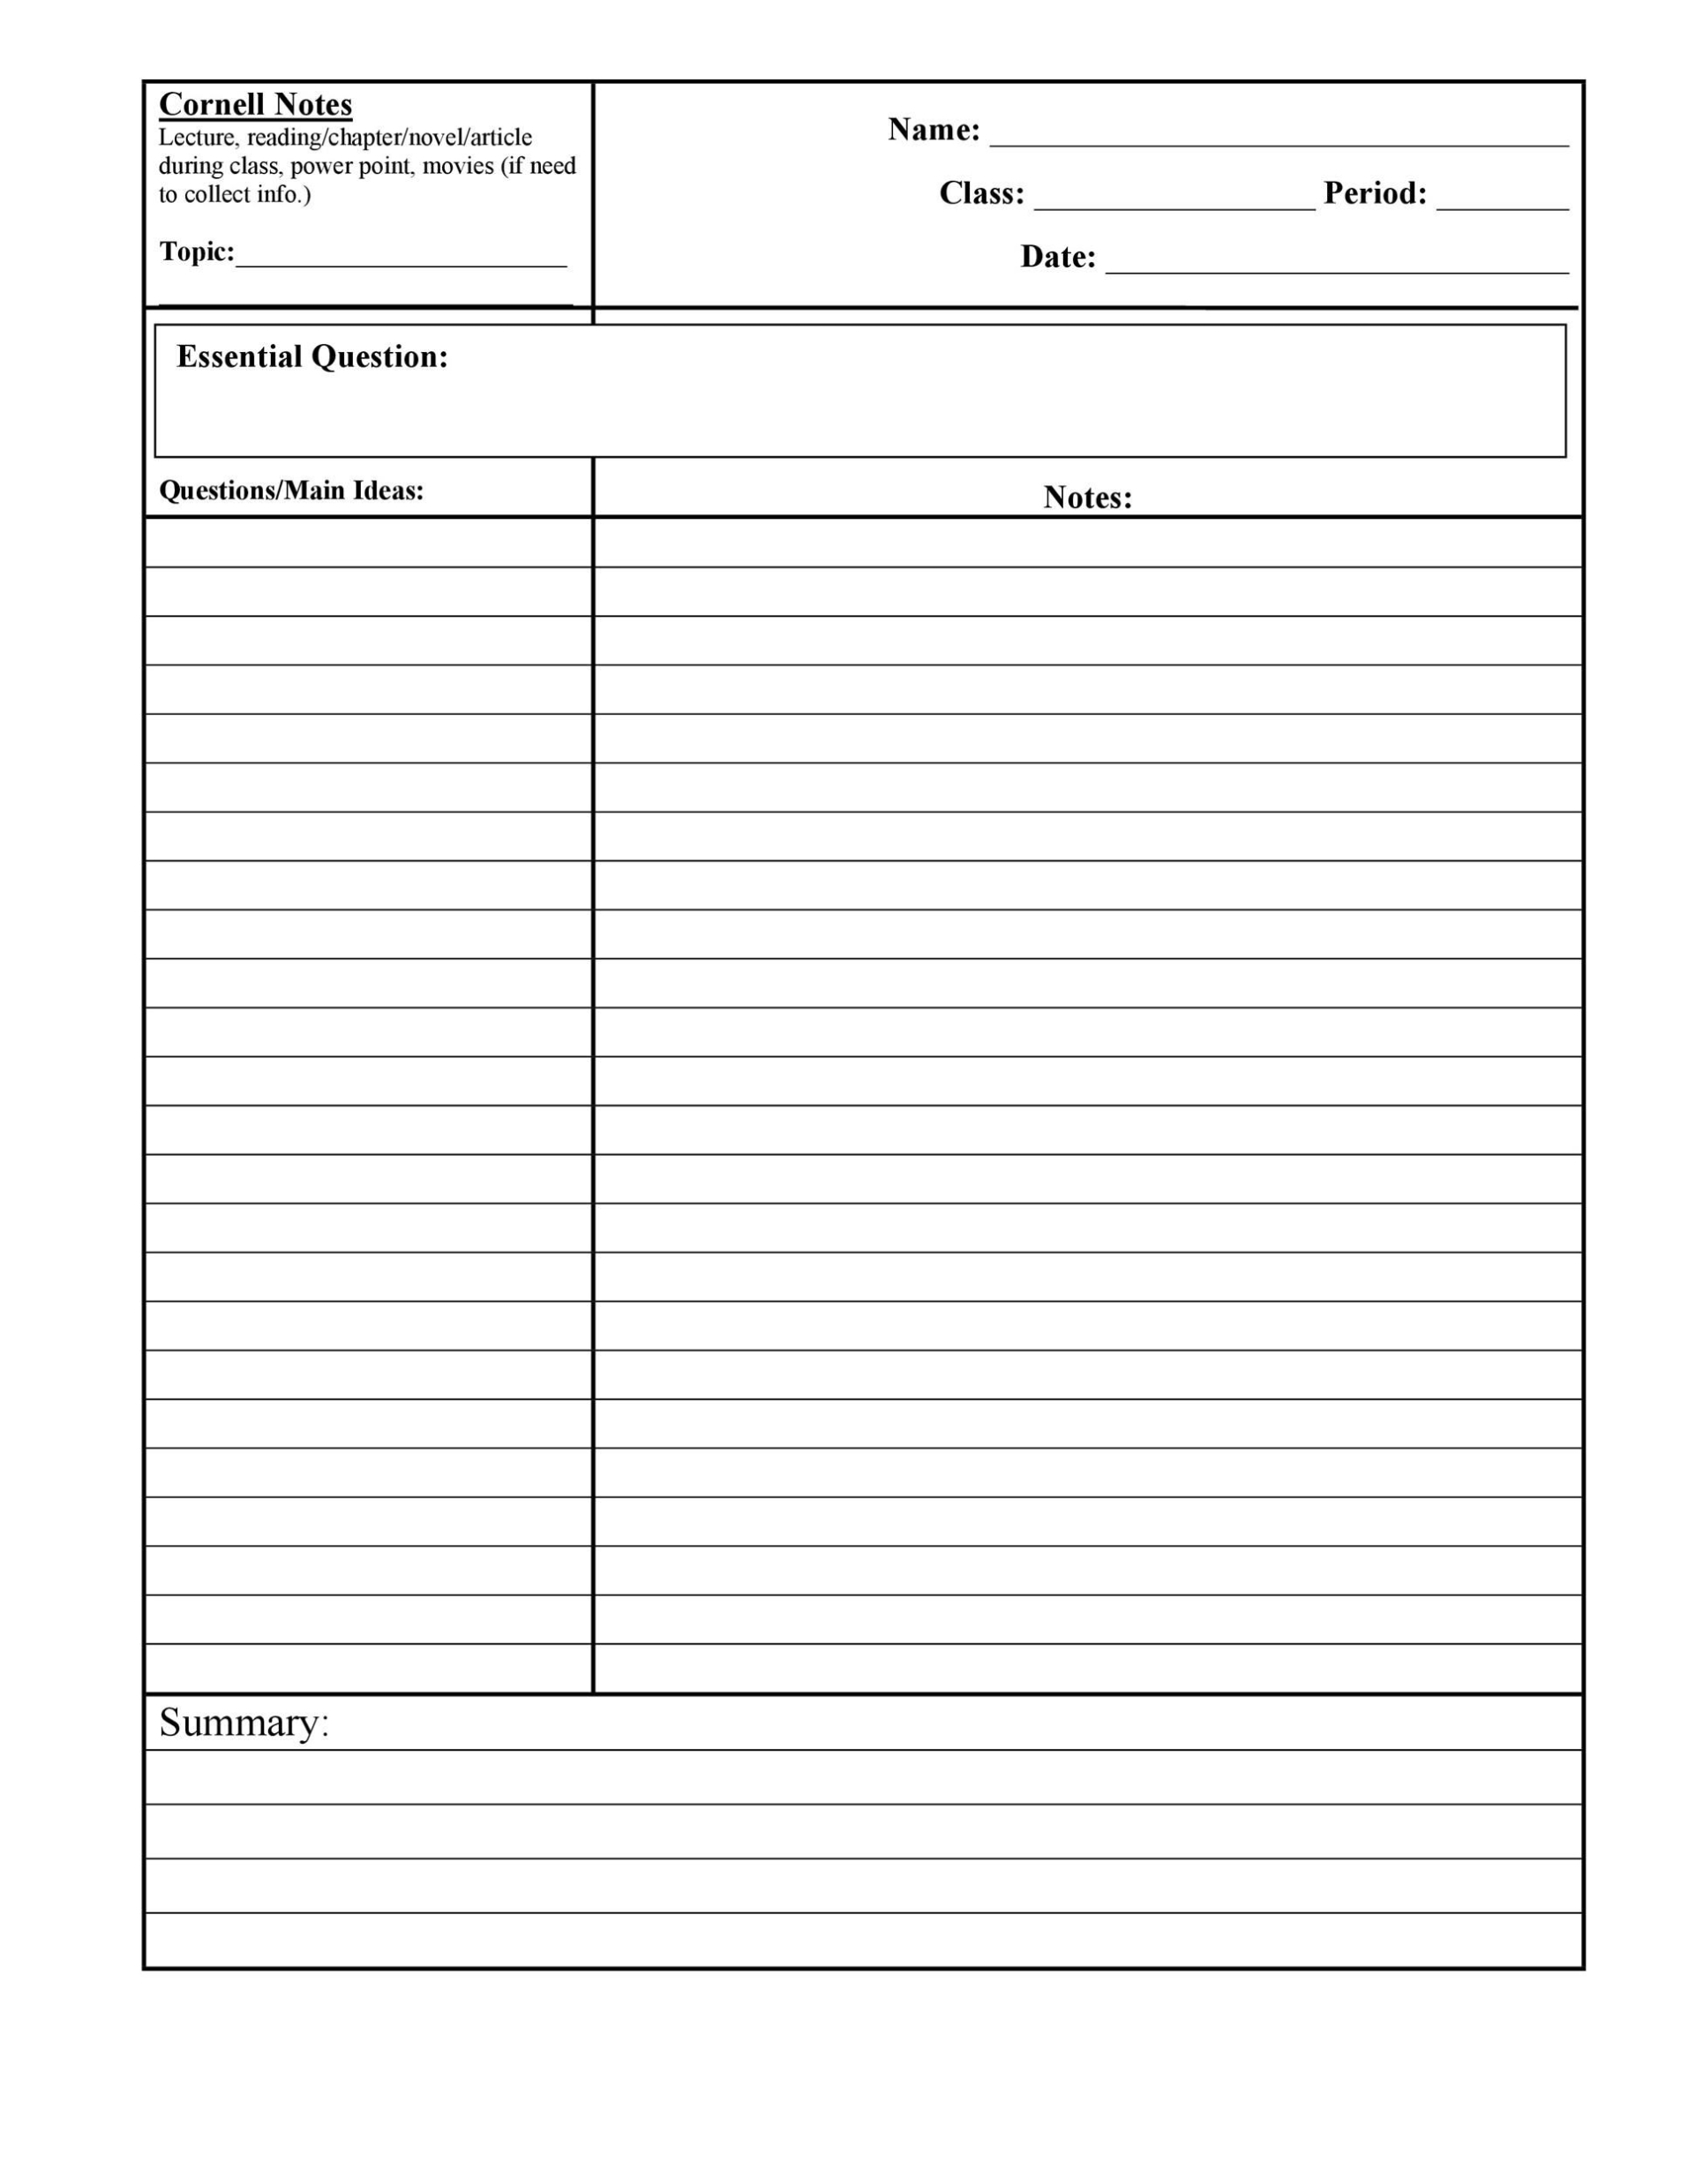 Addictionary Within Cornell Notes Google Docs Template